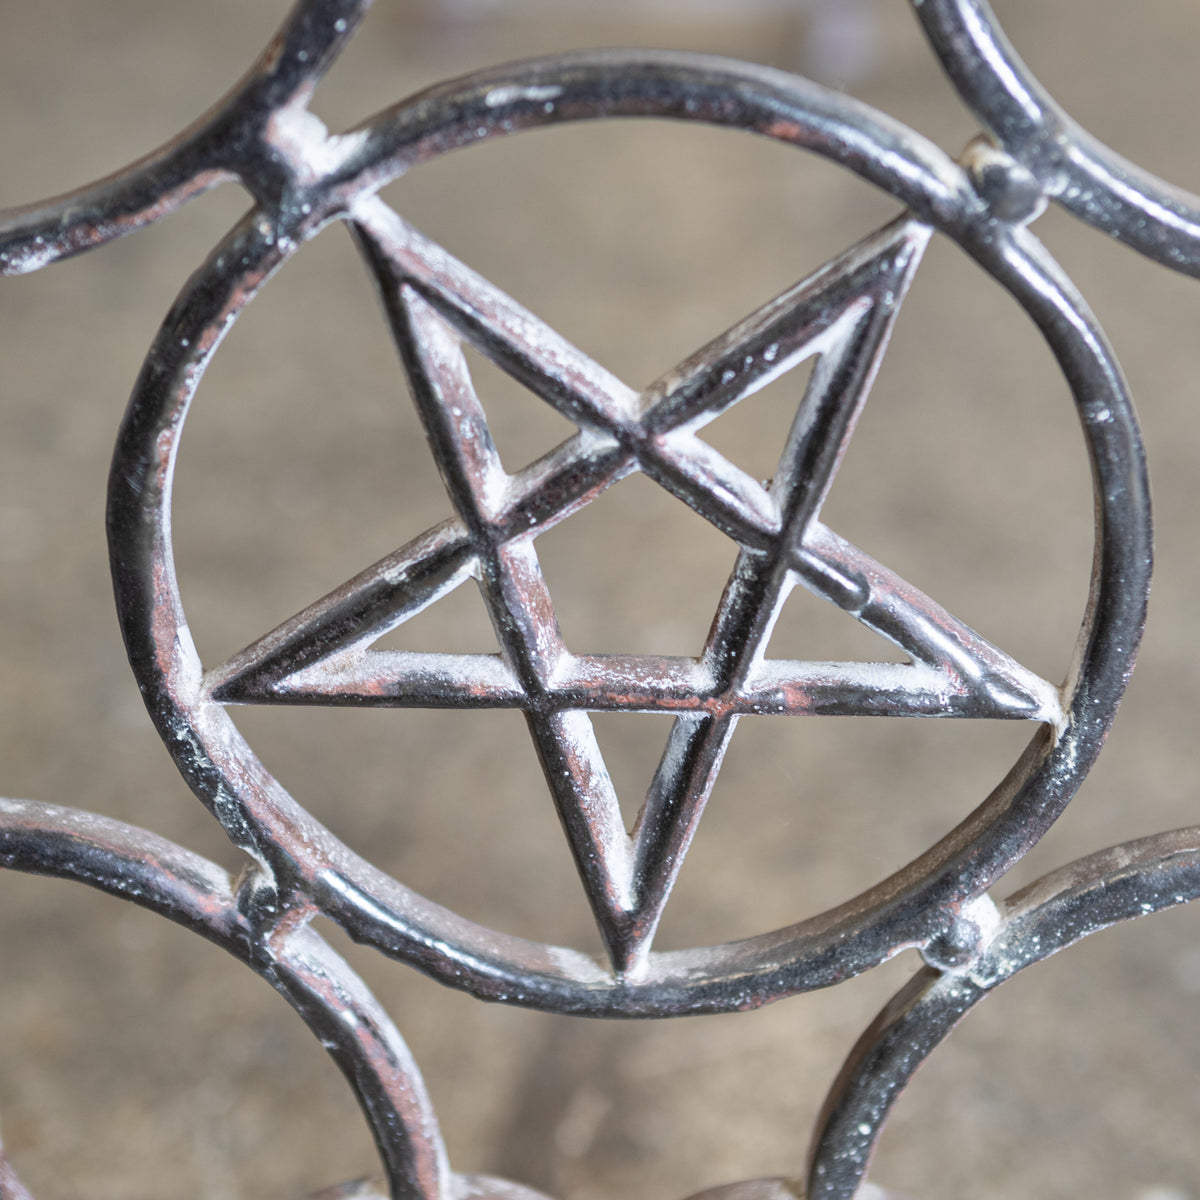 Reclaimed Cast Iron Long Bench with Pentagram | The Architectural Forum